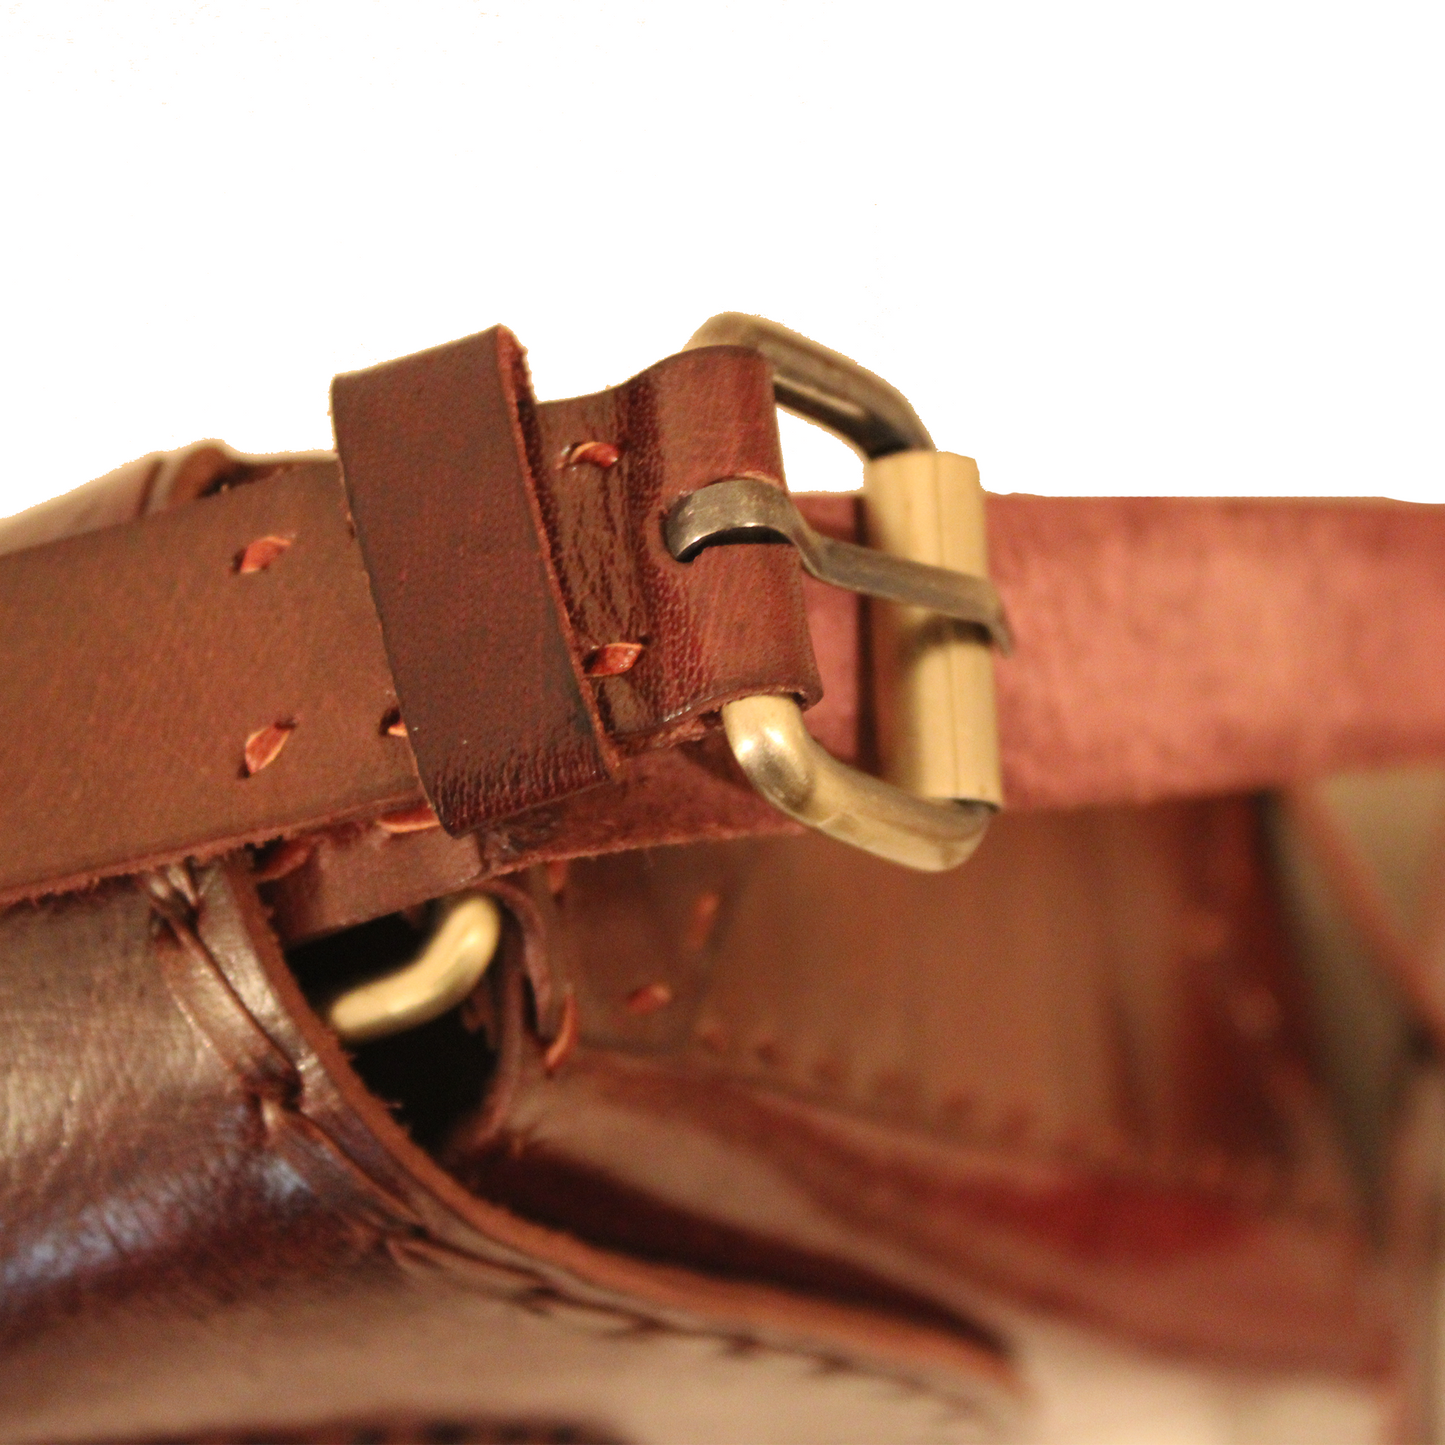 Woody Brown Hand embroidered Classic Saddle Sling Bag